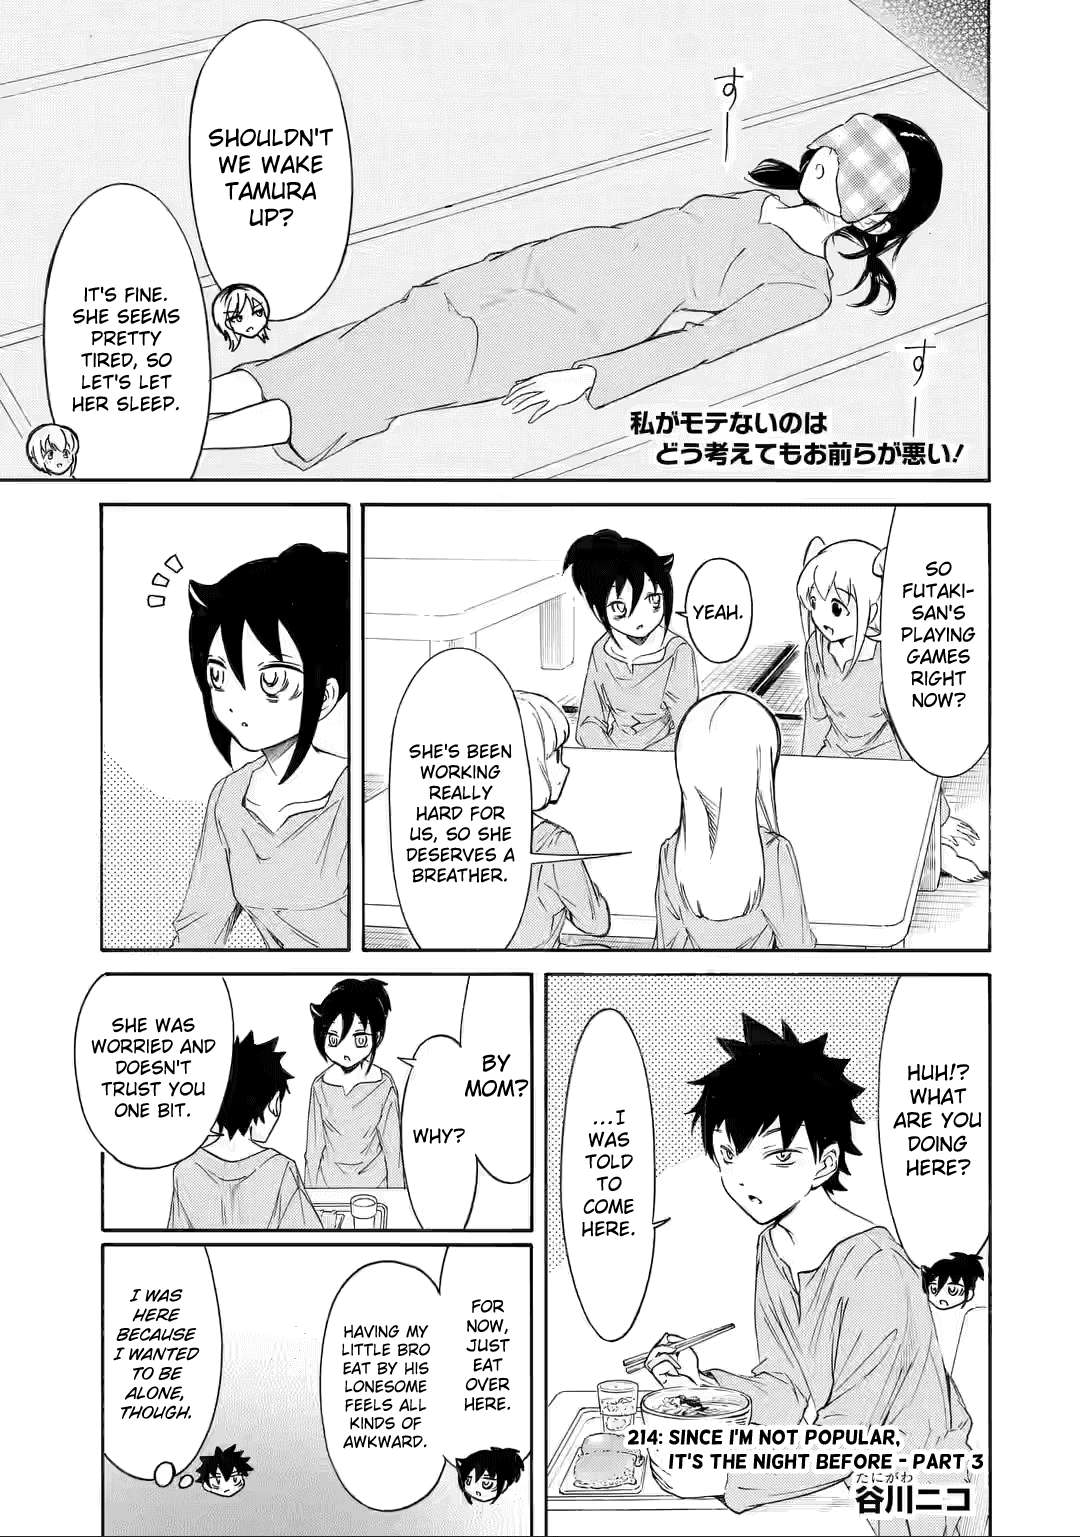 It's Not My Fault That I'm Not Popular! - chapter 214.3 - #1